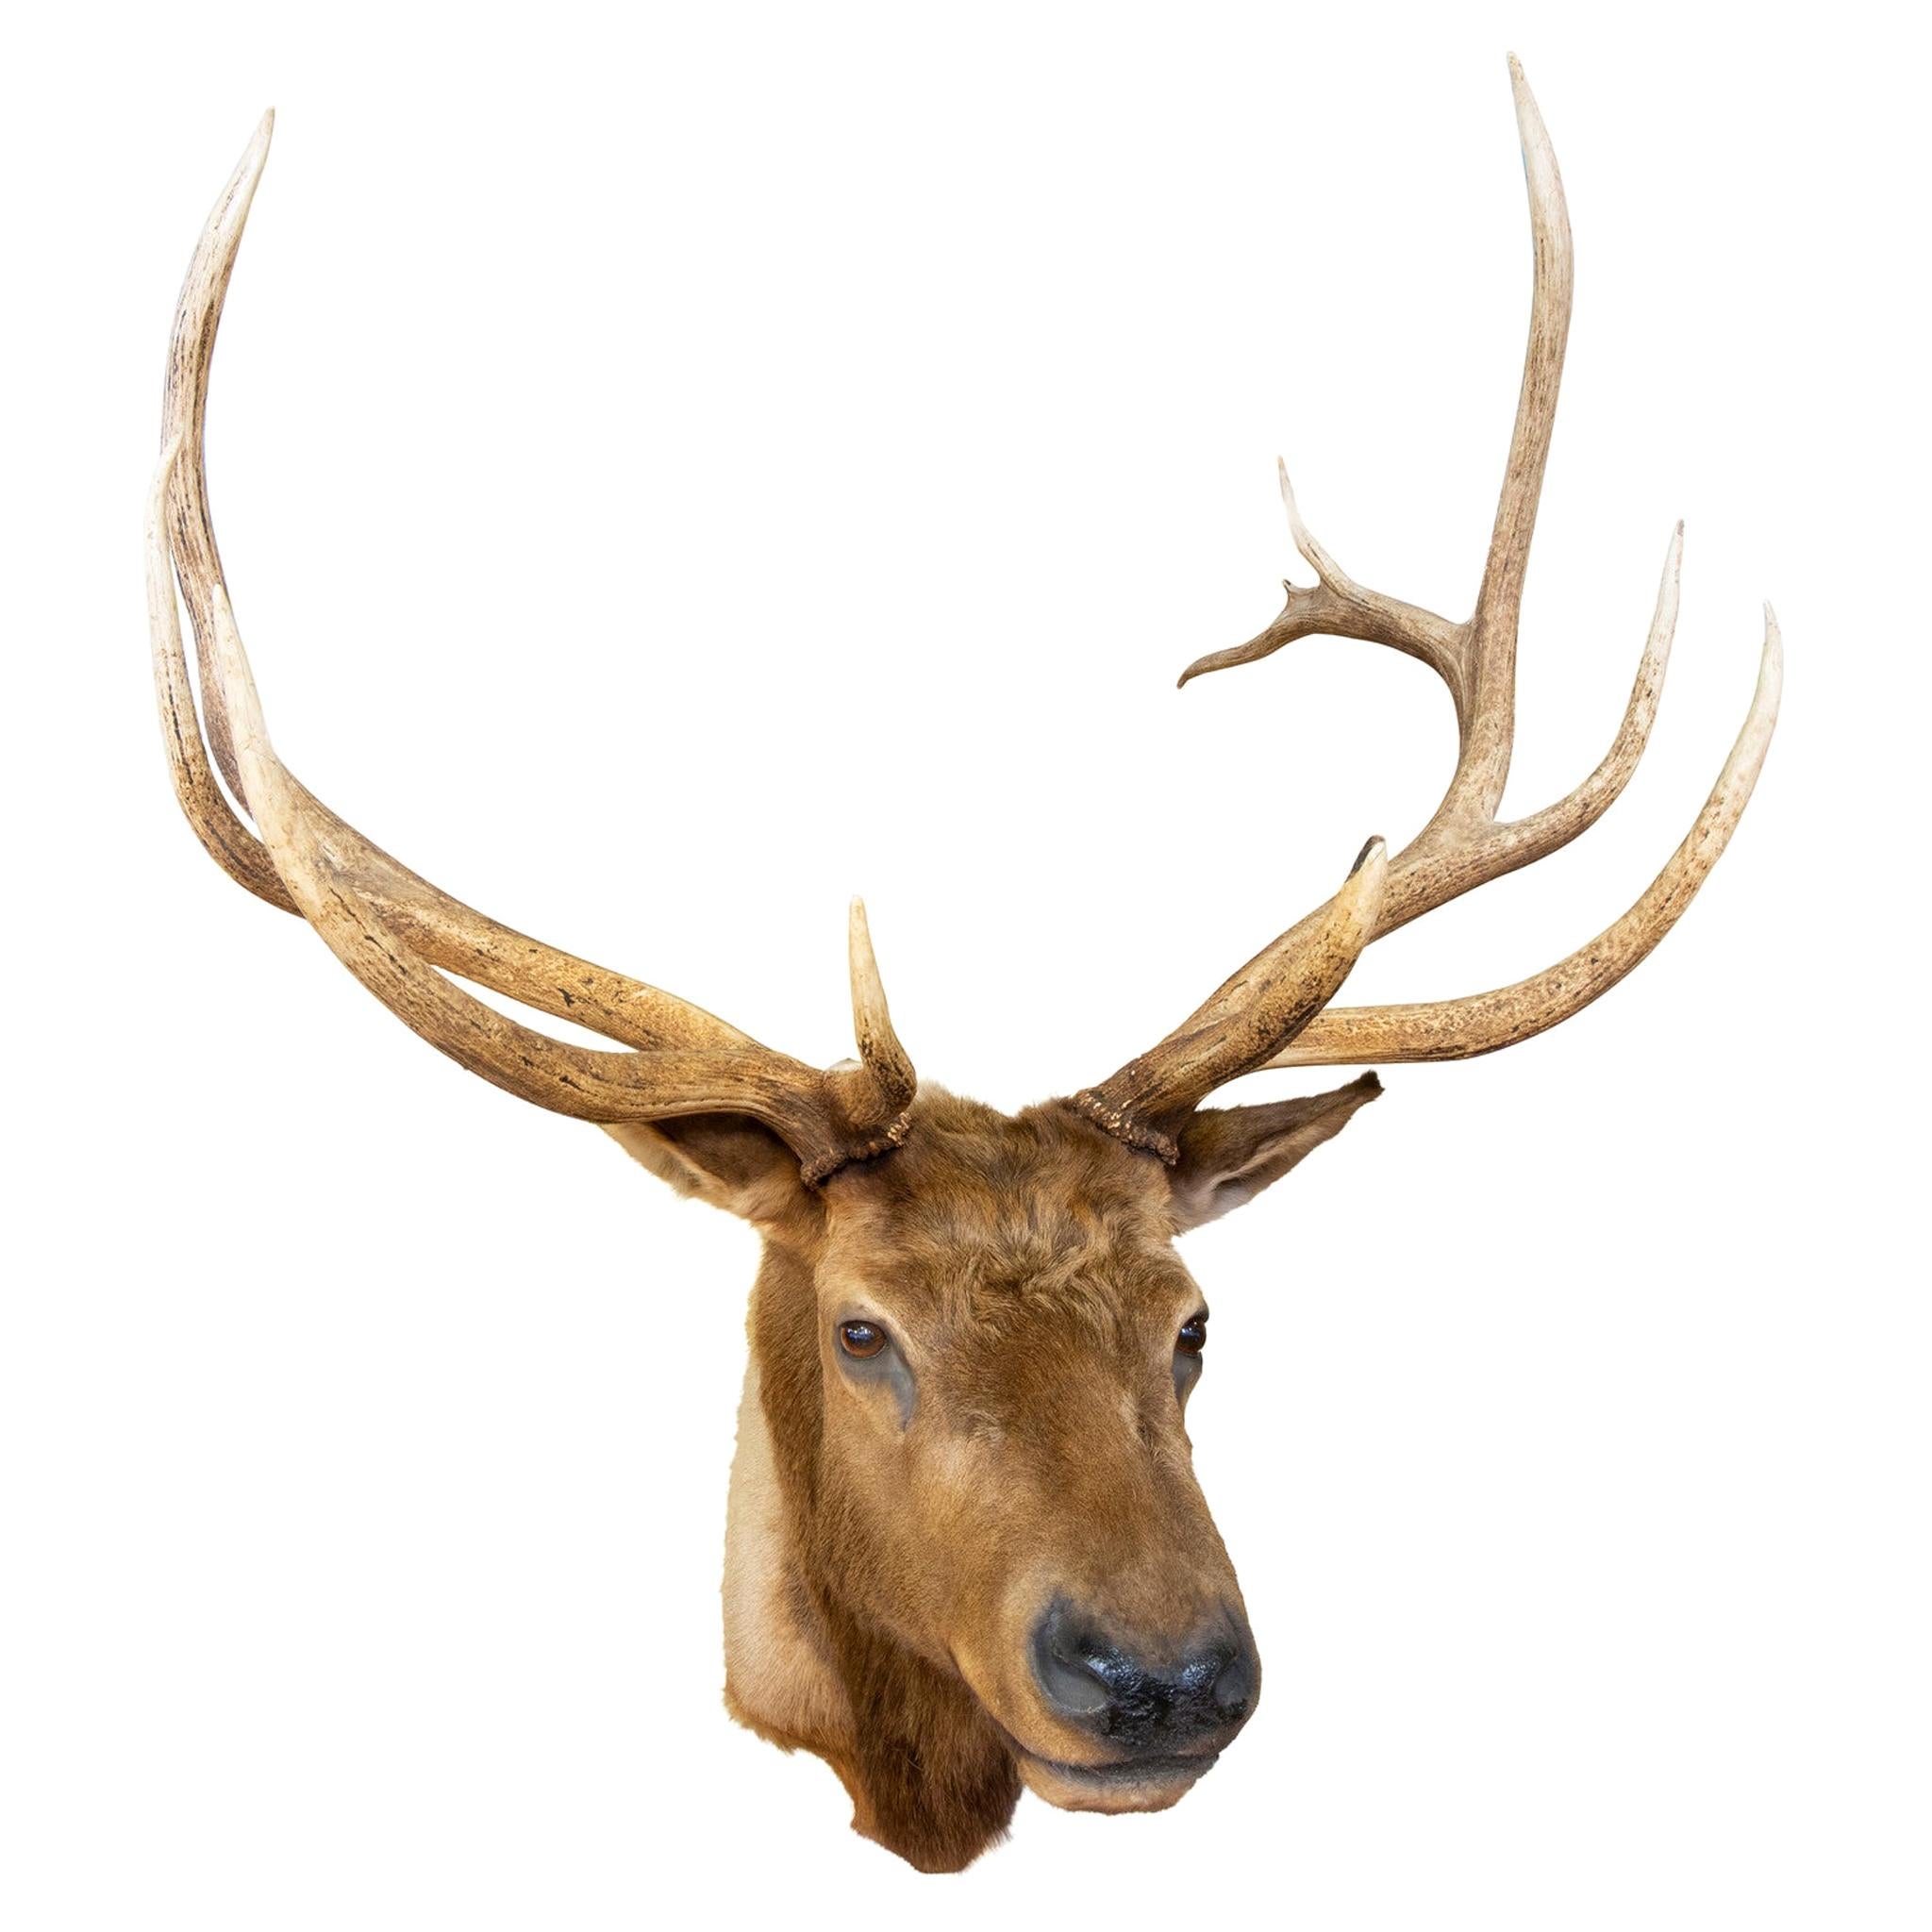 Is it legal to sell taxidermy?